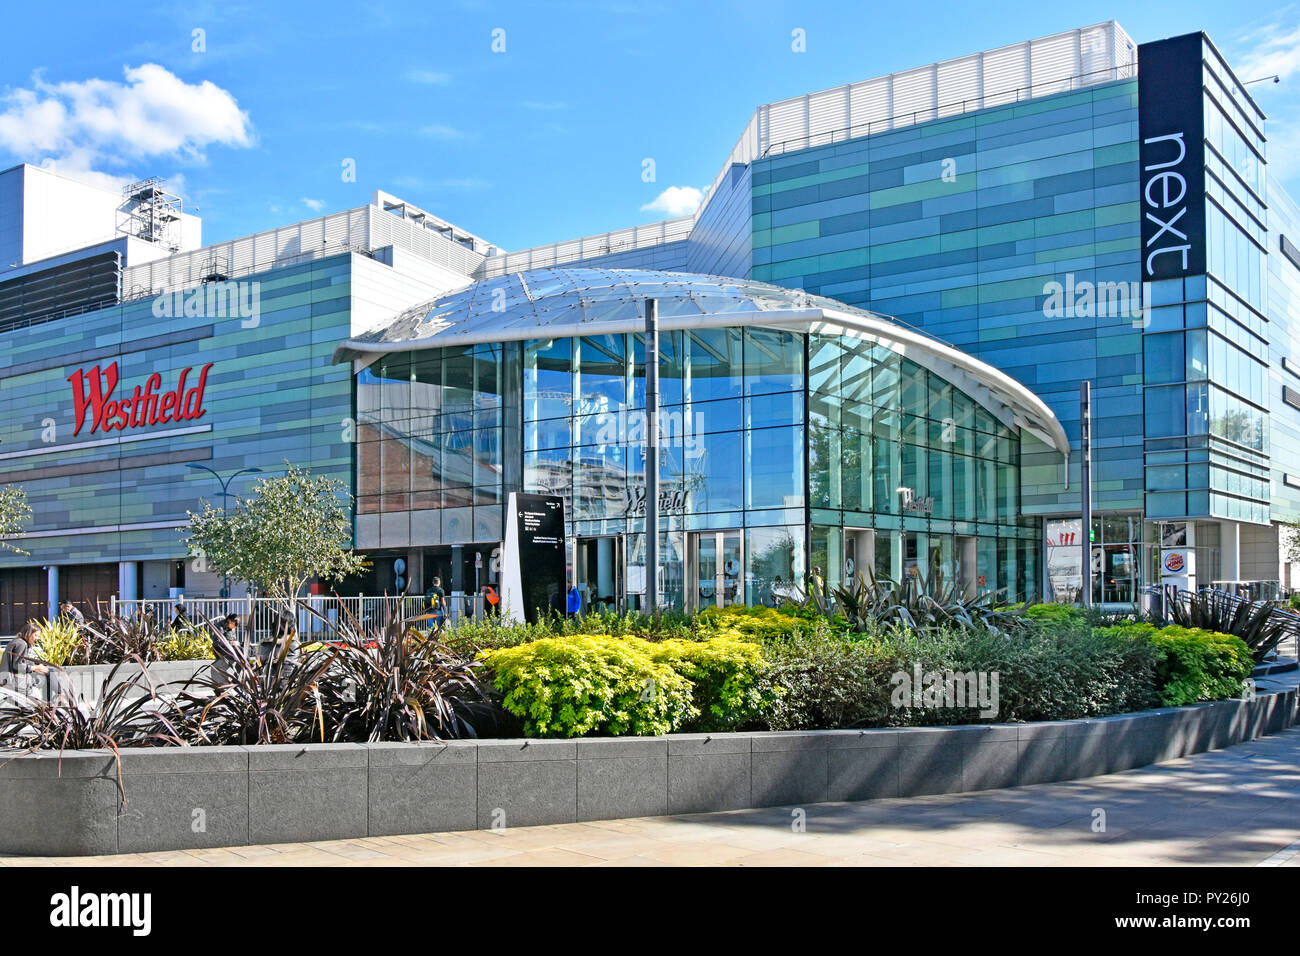 A view of the outside of the Westfield Shopping Center at White City,  Shepherd's Bush in West London, UK Stock Photo - Alamy